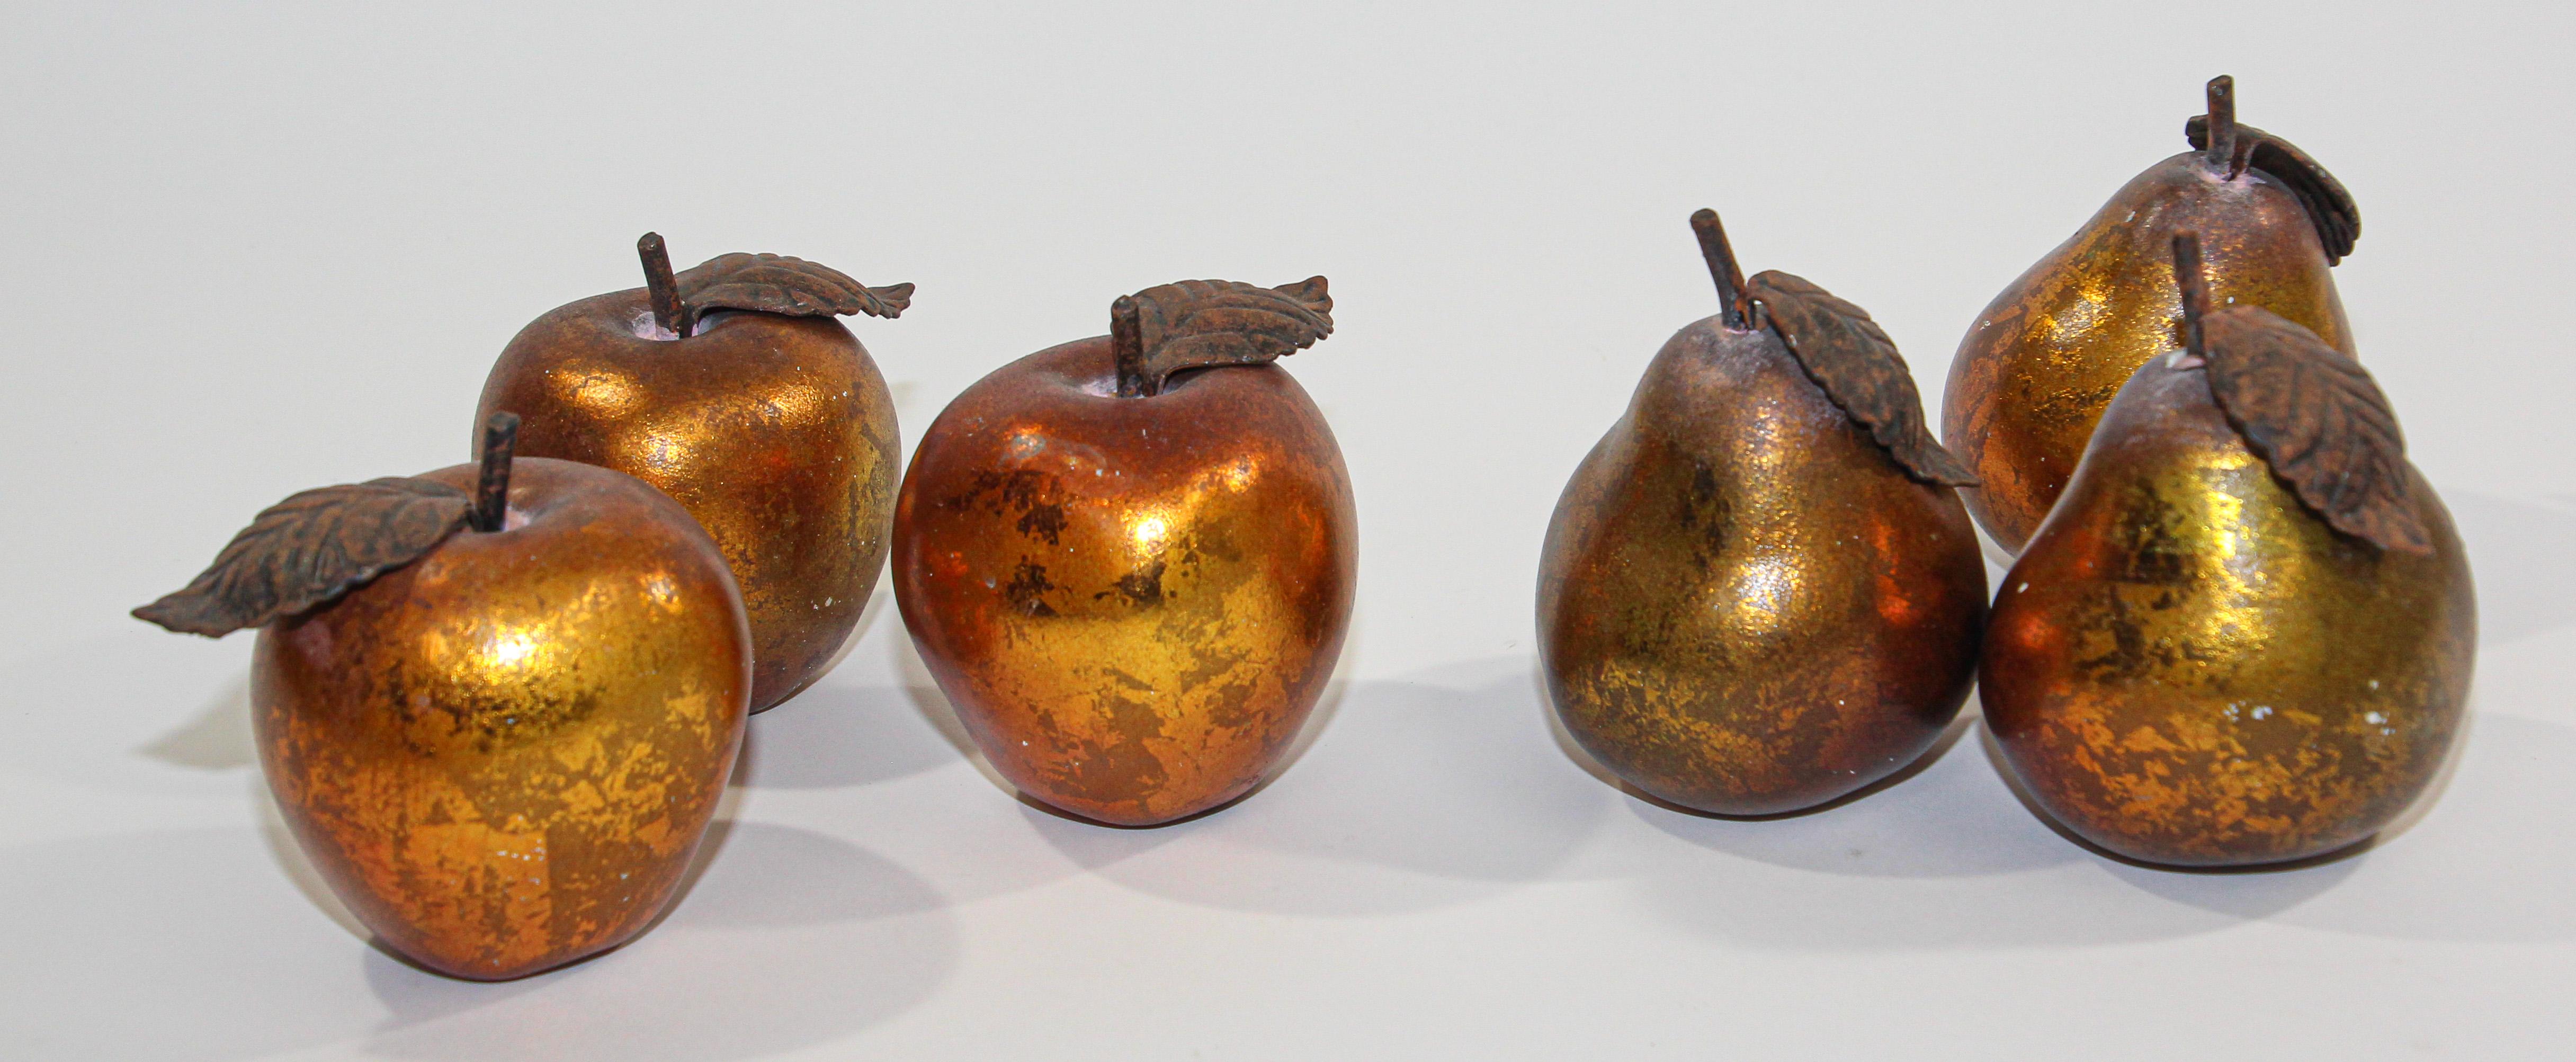 Vintage gilt metal pears and apples with faux oxidation and distress look. 
They are hollow, not heavy and they have a gold gilt like finish with a great patina.
Great for fall mantel decoration or shelf decor. 
Set of 3 pears and 3 apples.
Each